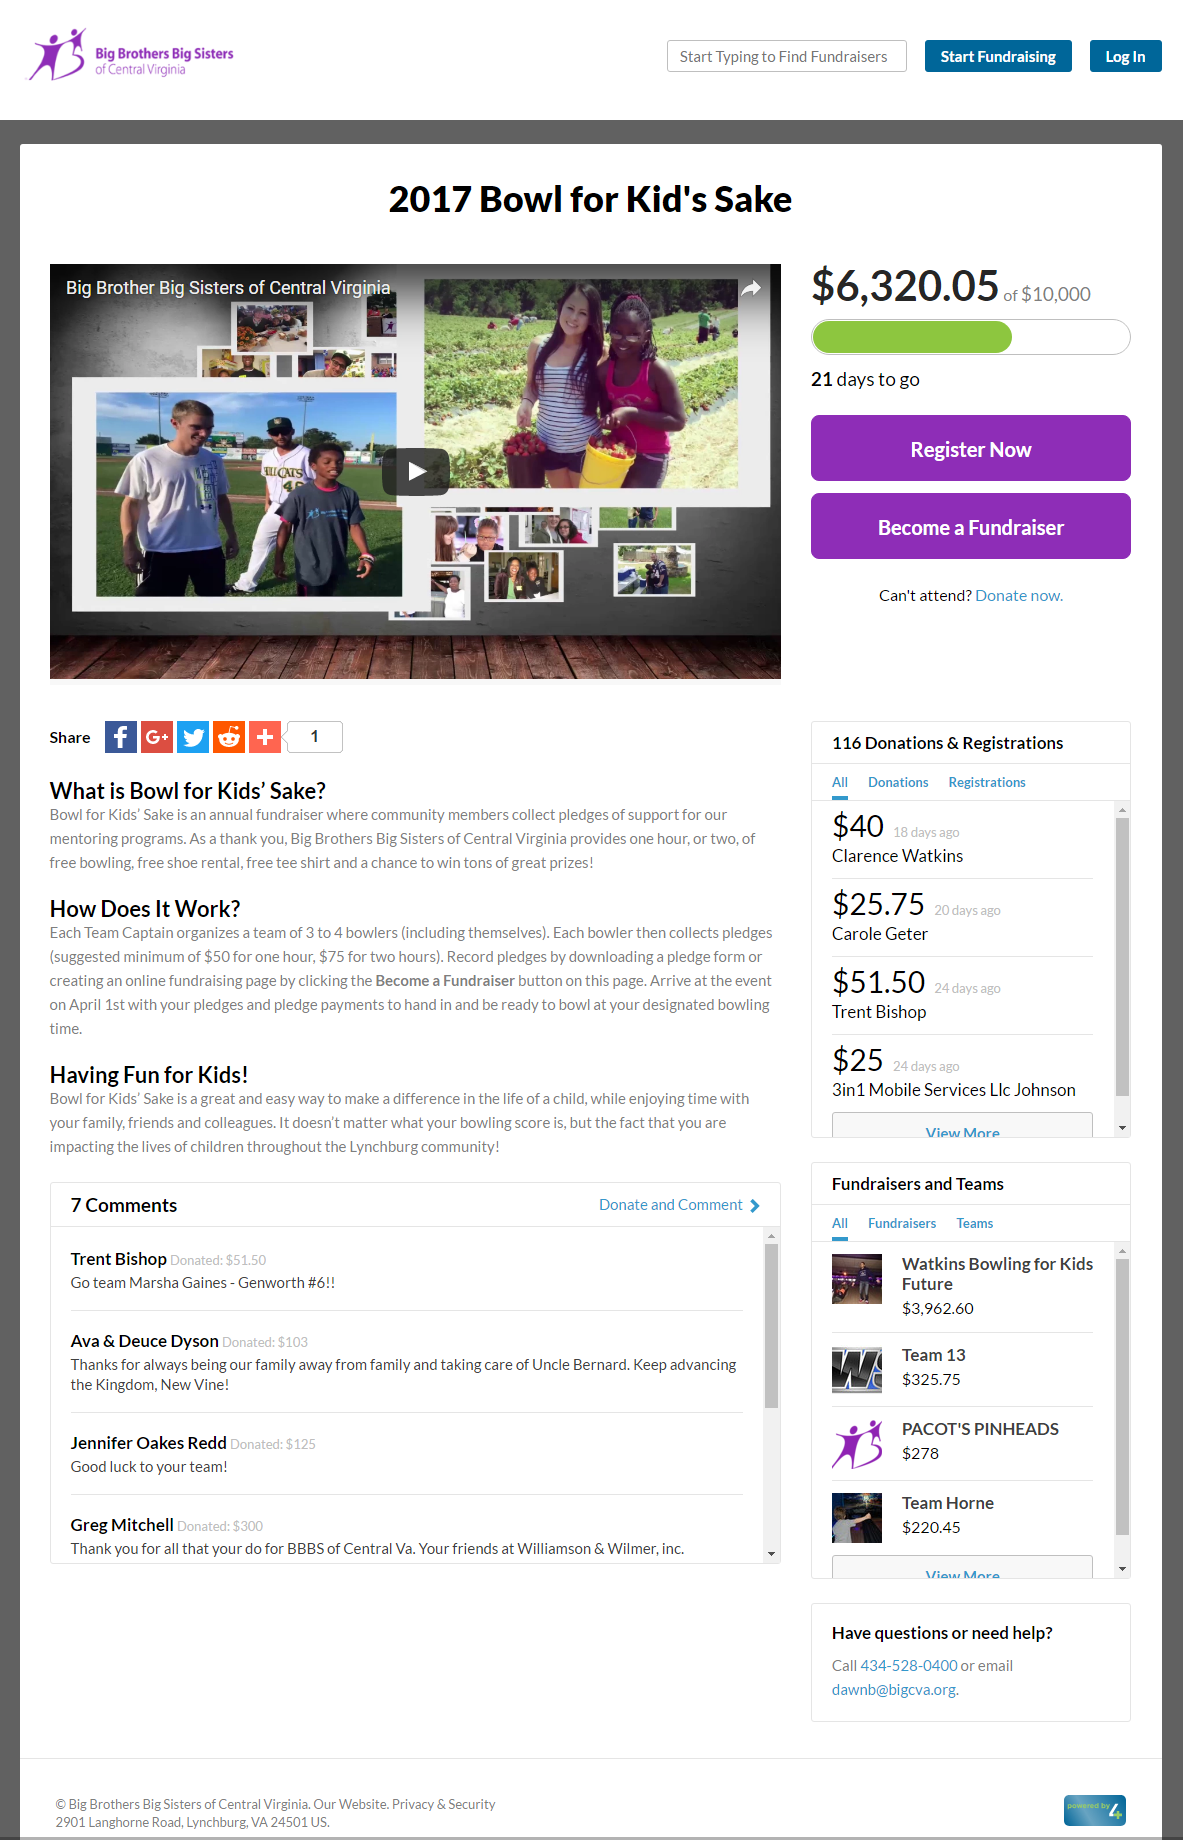 Example landing page from Big Brothers Big Sisters of Central Virginia